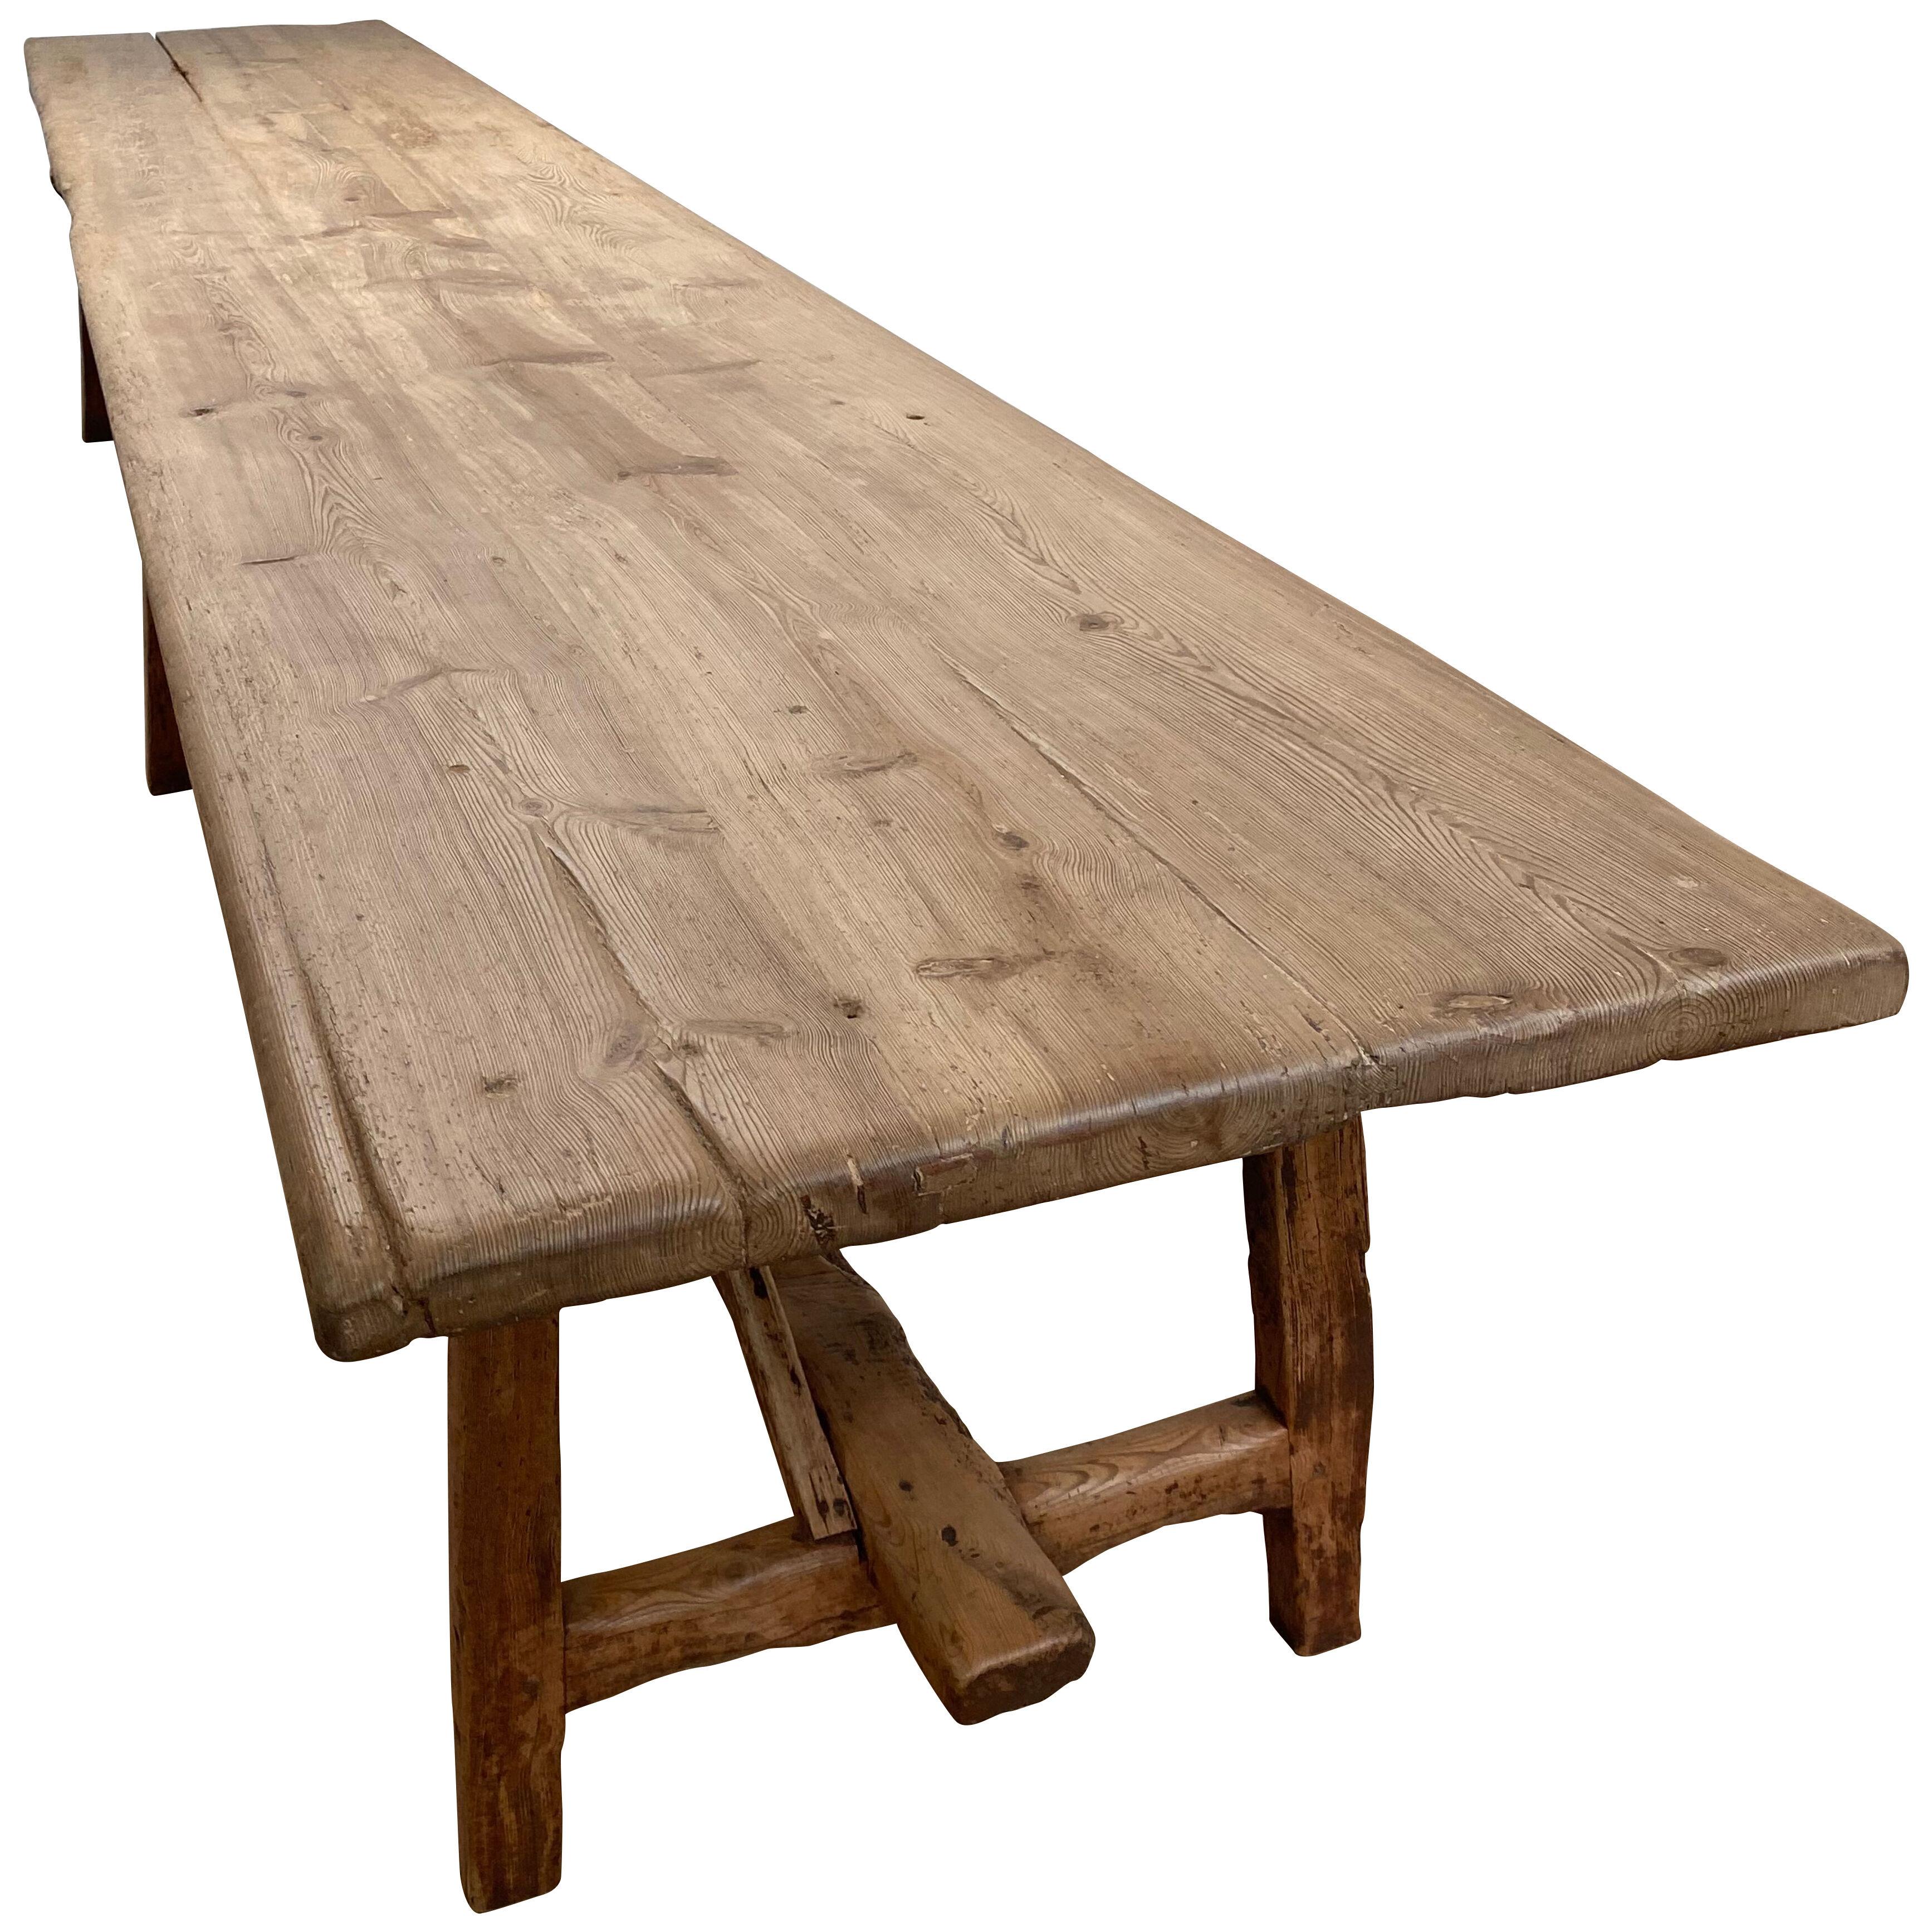 Extremely Huge Rustic Spanish Farm Table